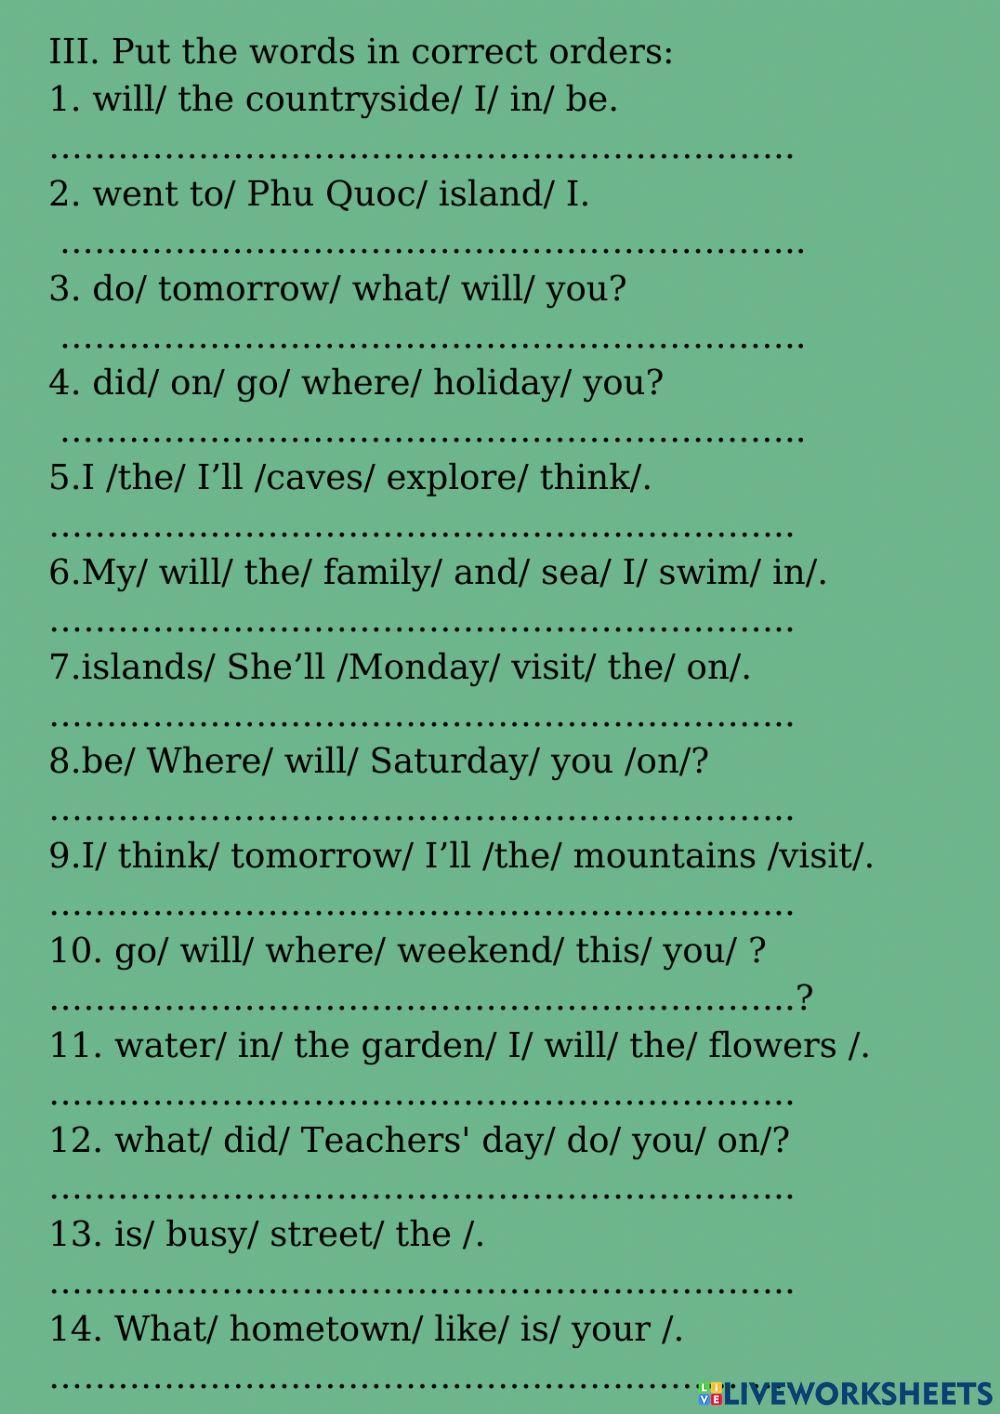 English 5 Unit 5: where will you be this weekend?